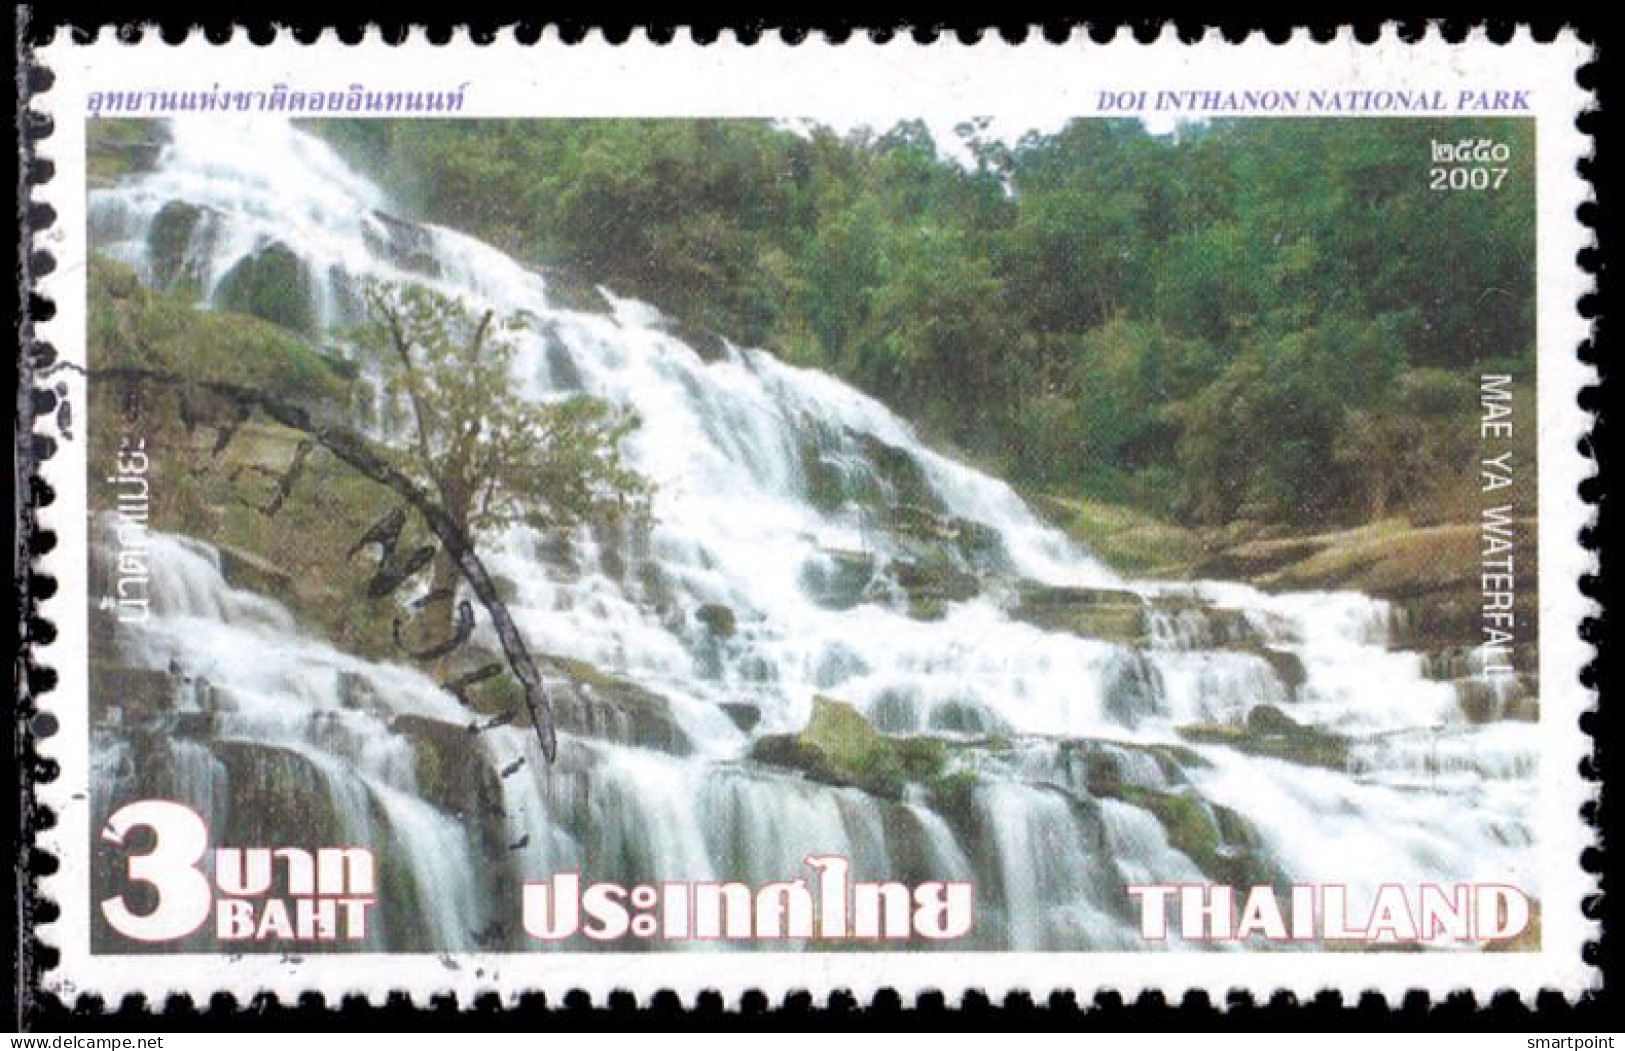 Thailand Stamp 2007 Waterfall (2nd Series) 3 Baht - Used - Thailand